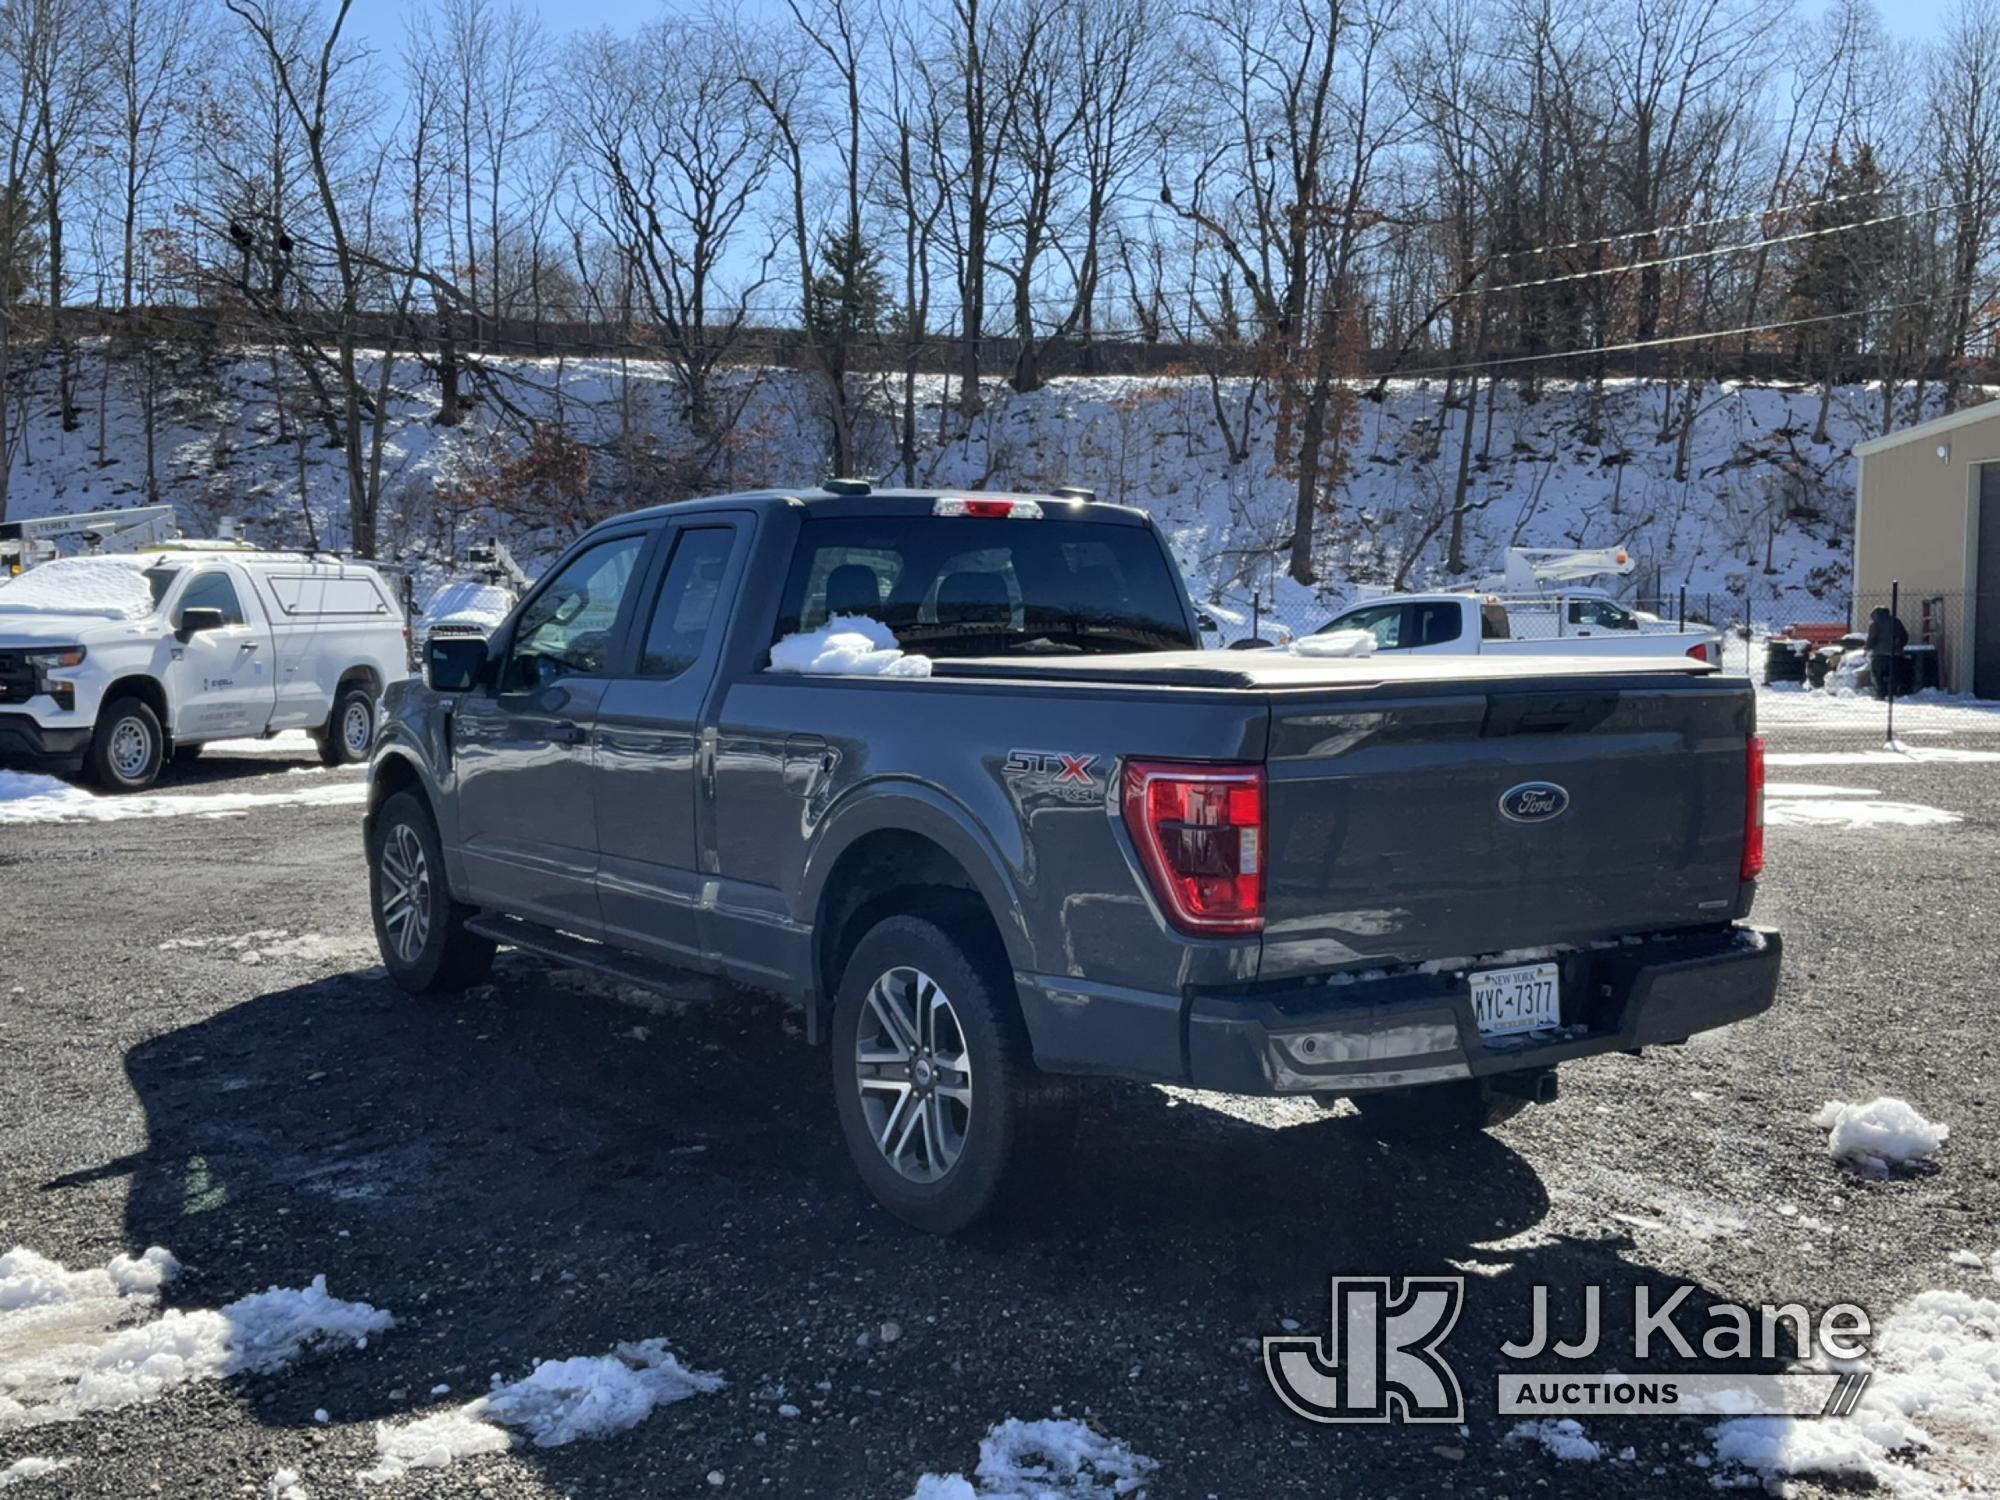 (Kings Park, NY) 2021 Ford F150 STX 4x4 Extended-Cab Pickup Truck Runs & Moves, Engine Light On) (In